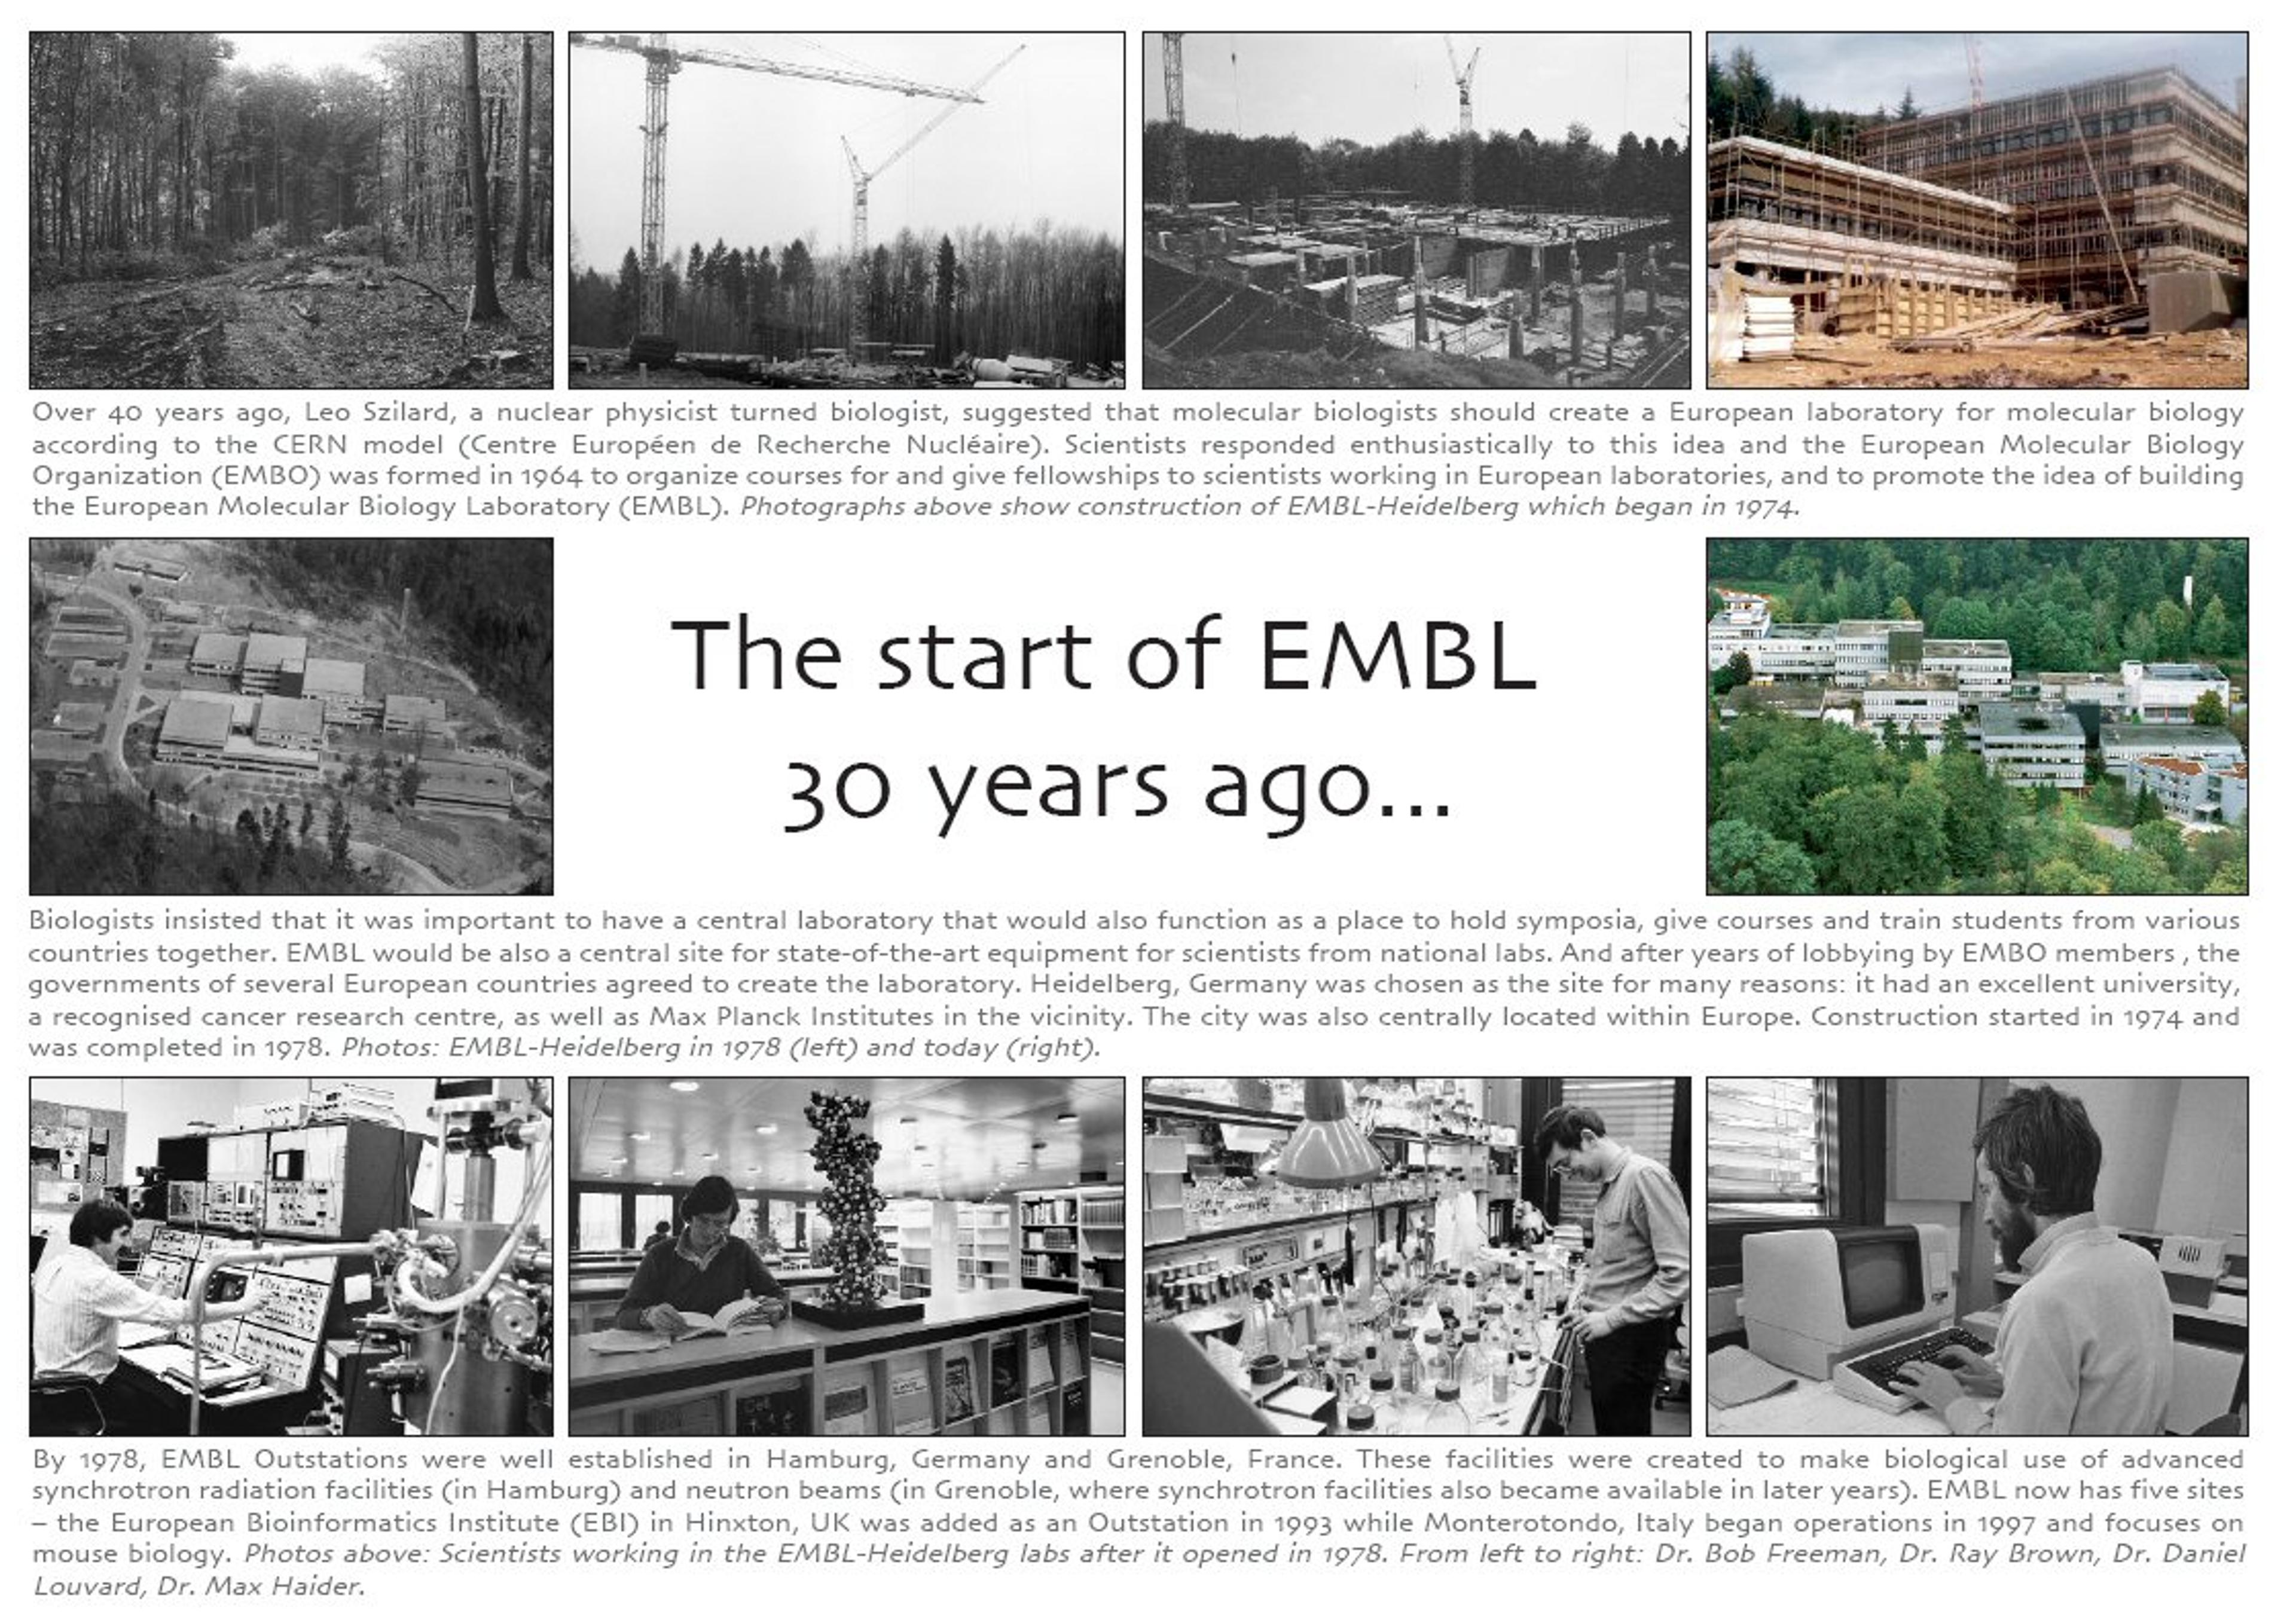 Photomontage of the start of EMBL 30 years ago